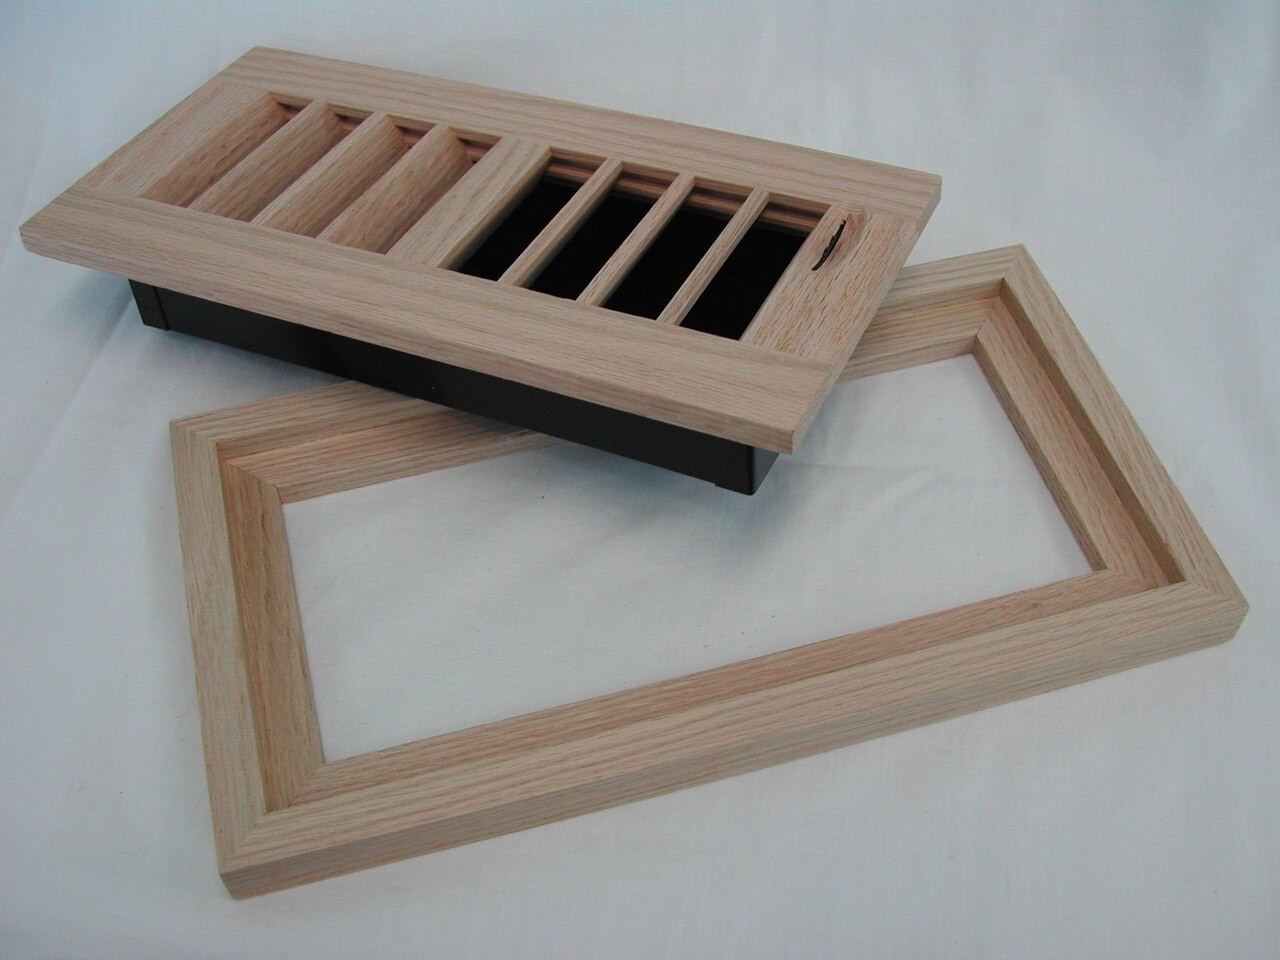 Wood Boxed Vent Cover Flush Mount Magnetic Frame (Maple finish) - 25 x 20  opening size (27 x 22 overall ) no mounting holes - Vent and Cover